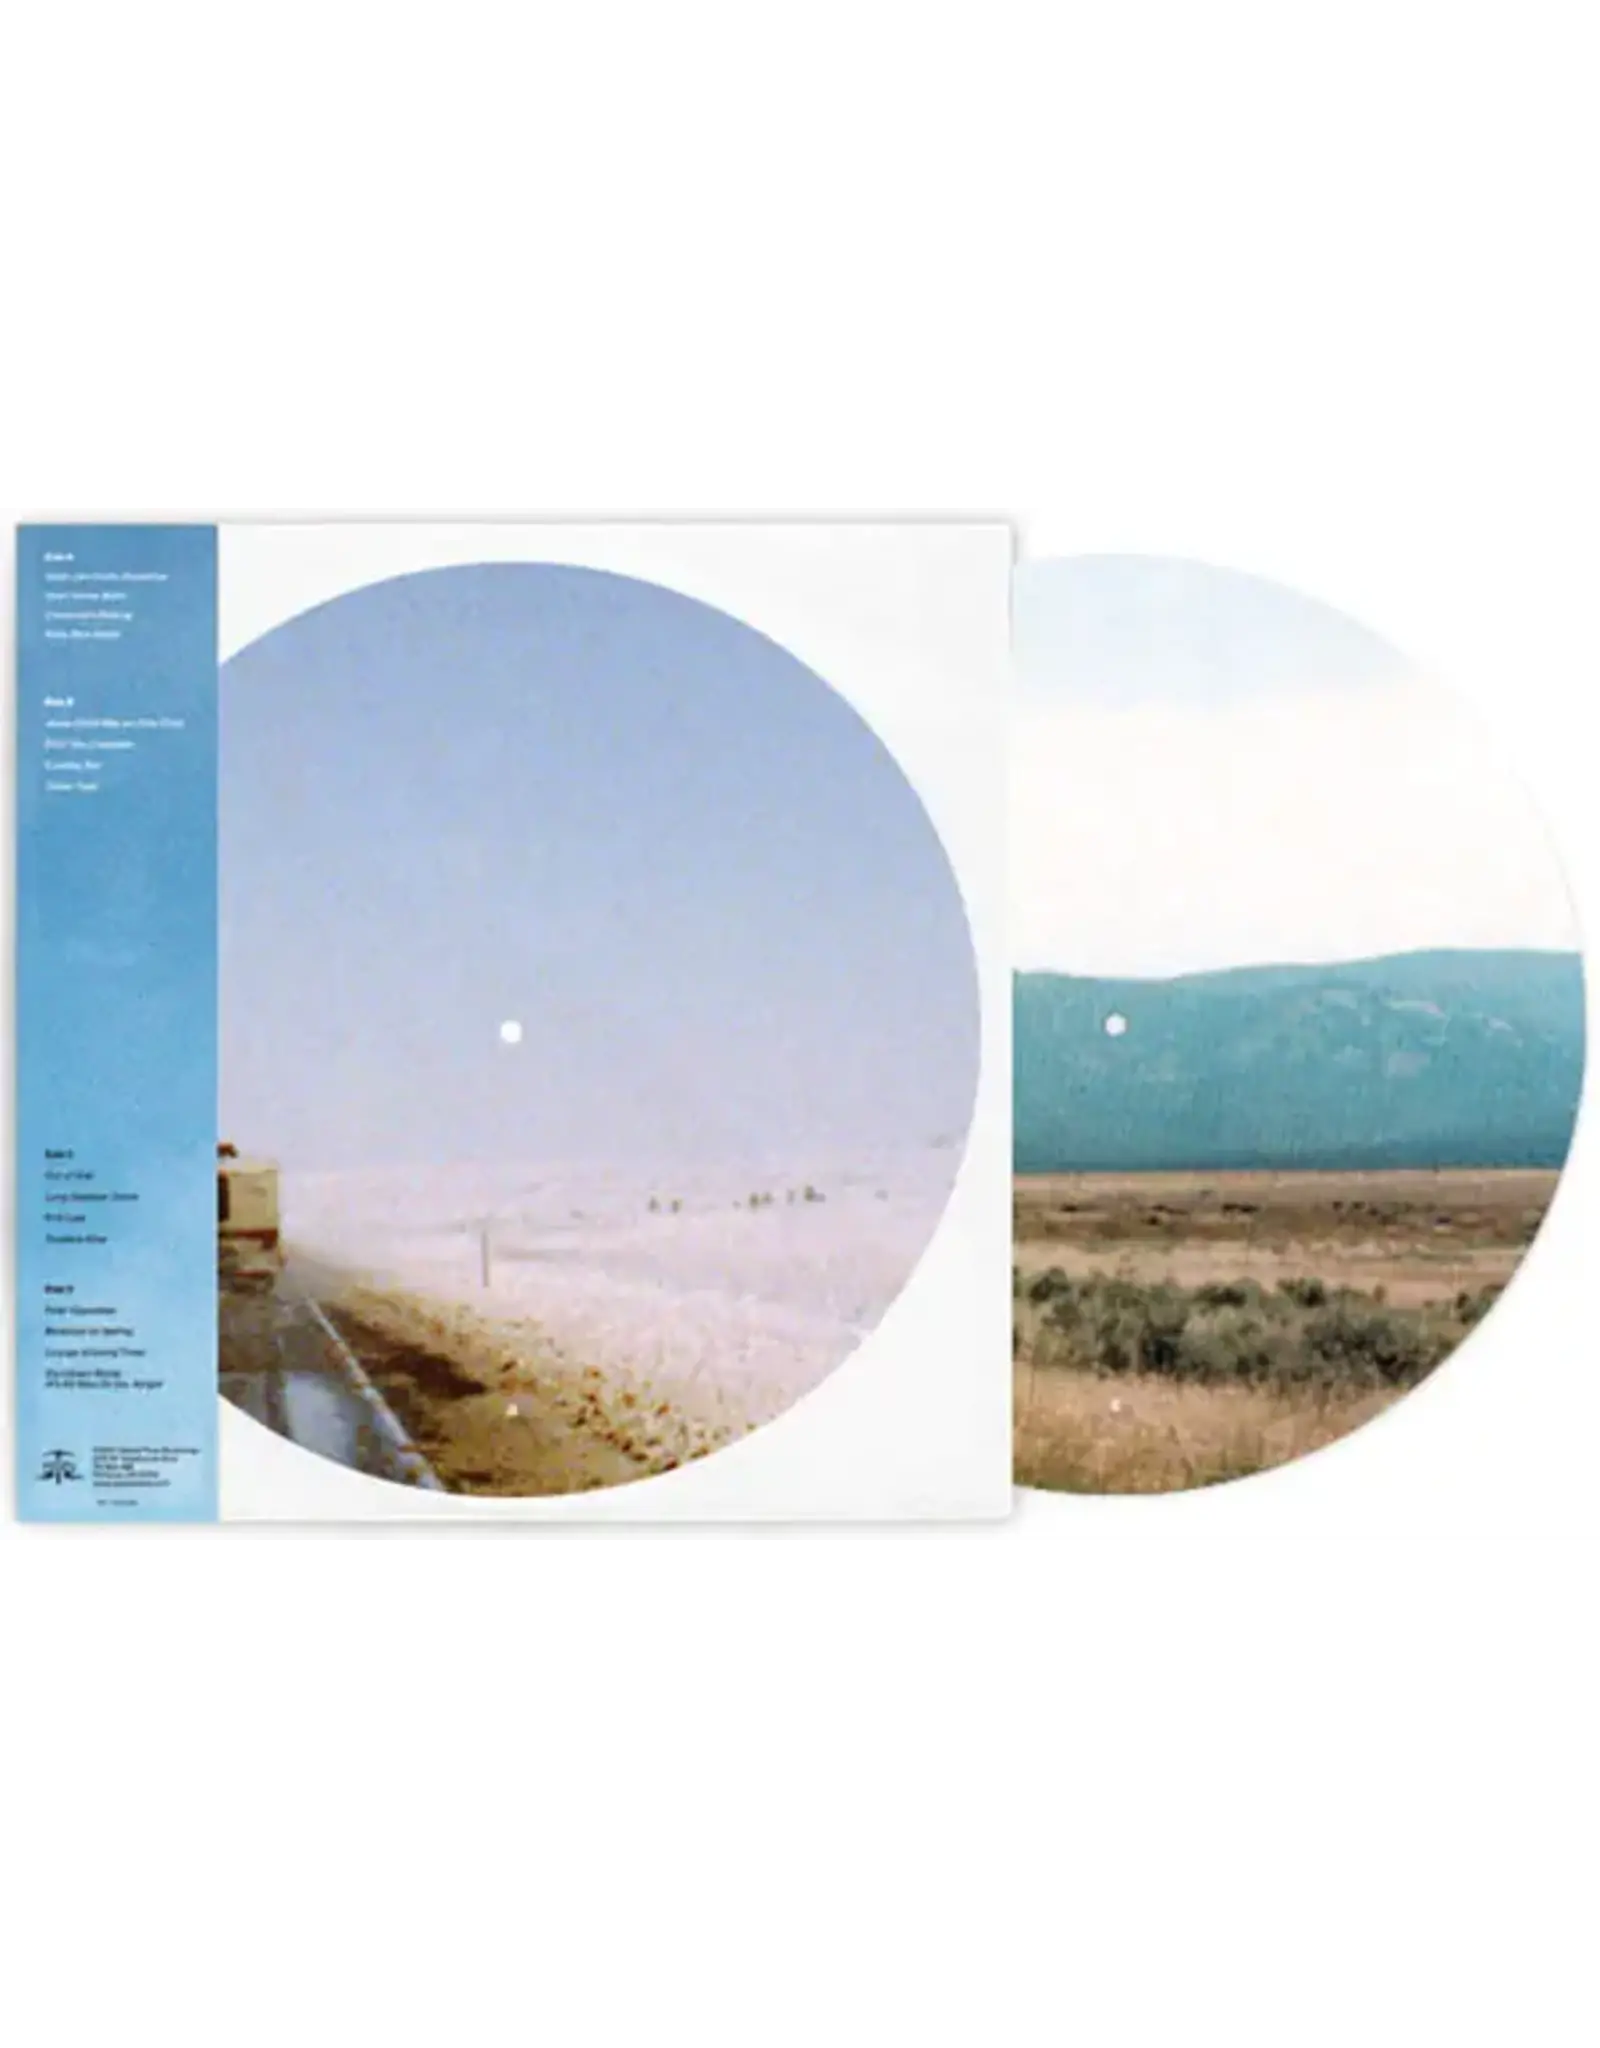 Glacial Pace Modest Mouse: The Lonesome Crowded West (RSD Essentials-2LP picture disc) LP